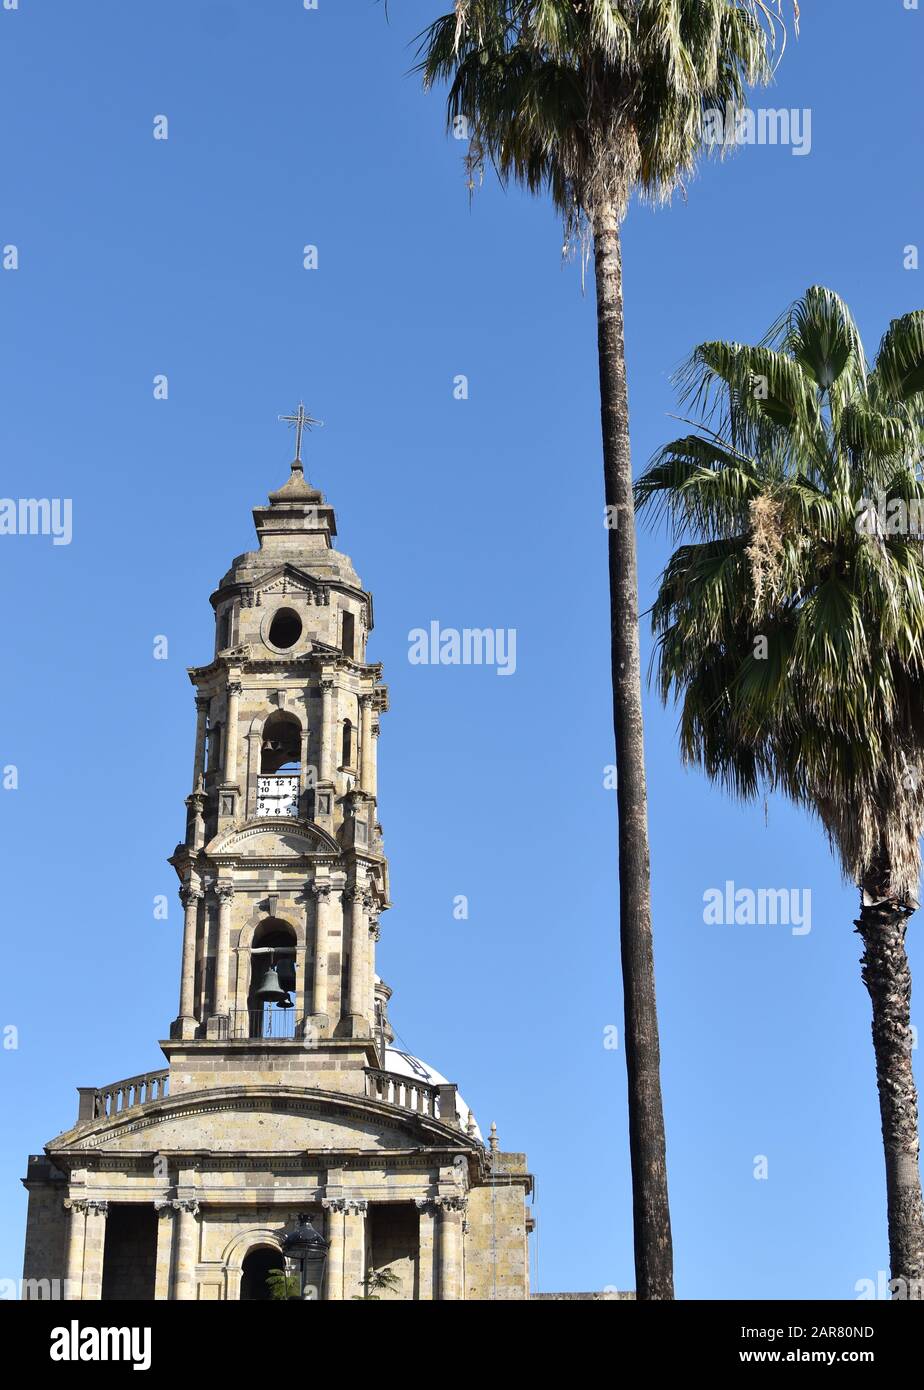 The church of San Jose de Gracia in Guadalajara, with a pair of nearby palm trees. Stock Photo